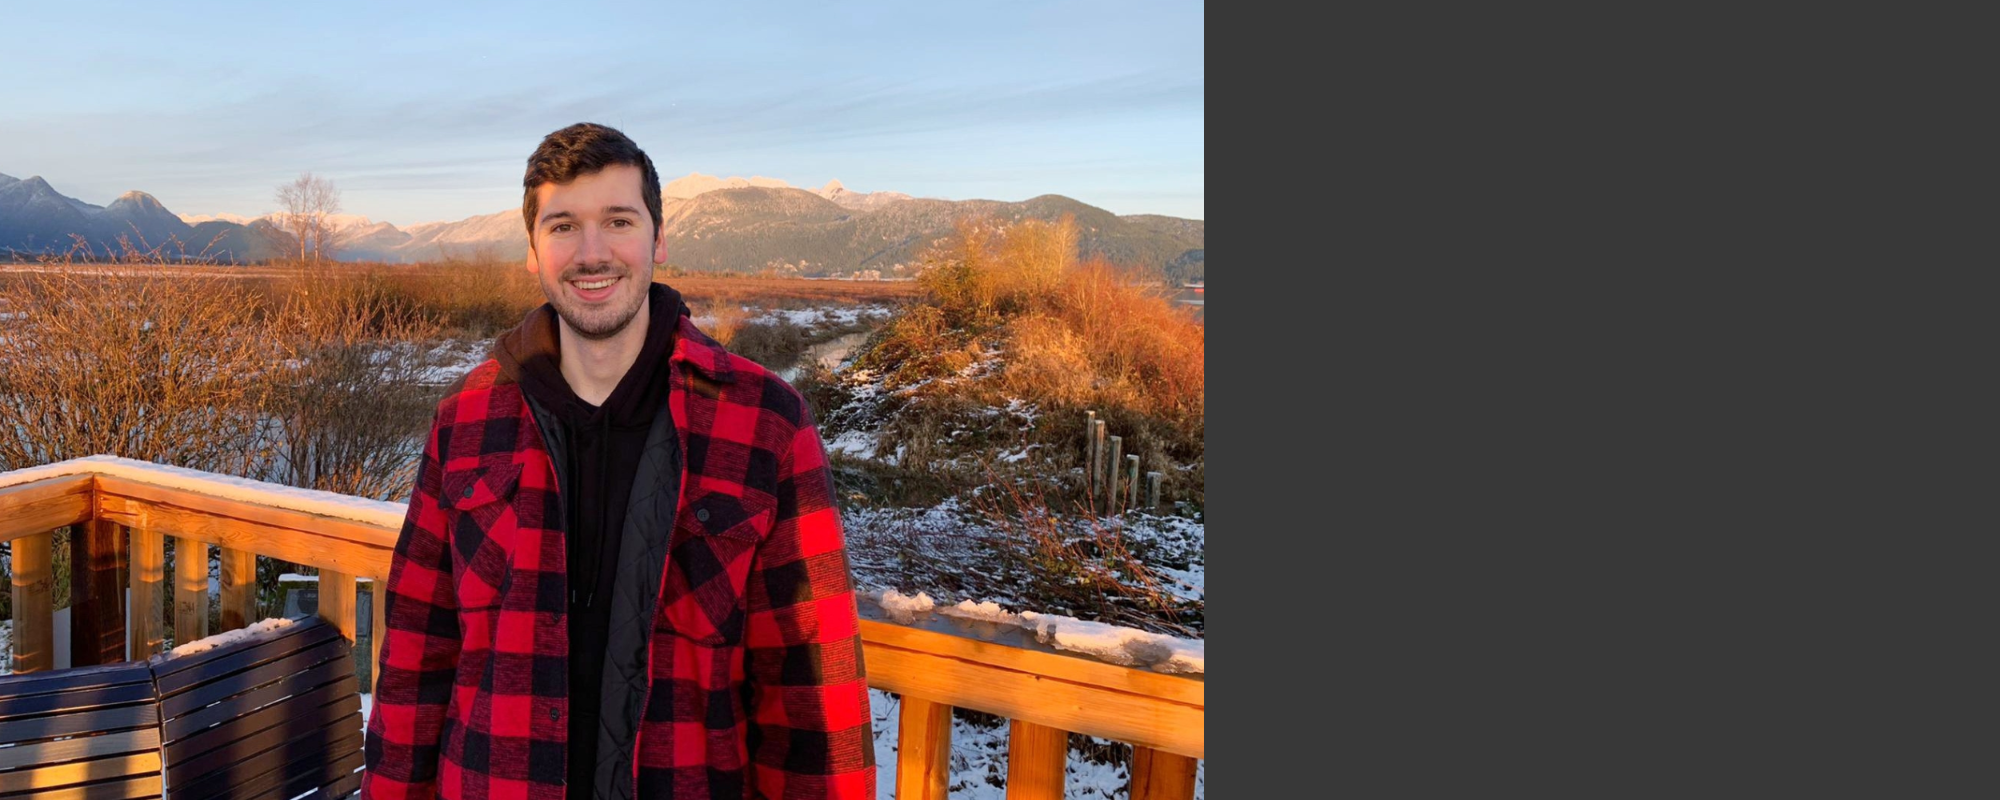 SFU Computing Science Graduand Travels The World While Completing His Degree